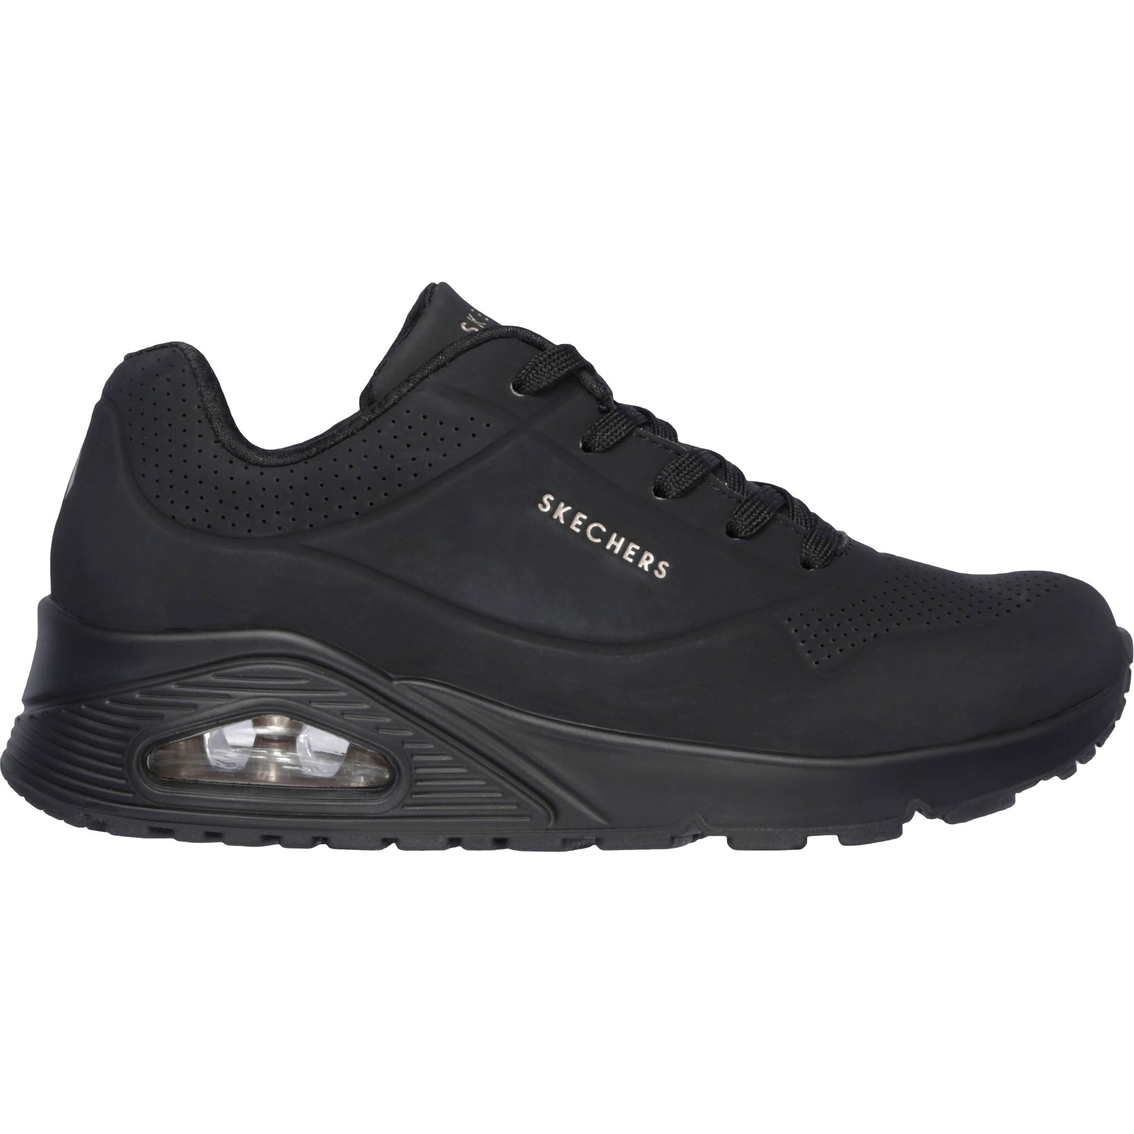 Skechers Women's Uno Stand on Air Sneakers - Image 2 of 5